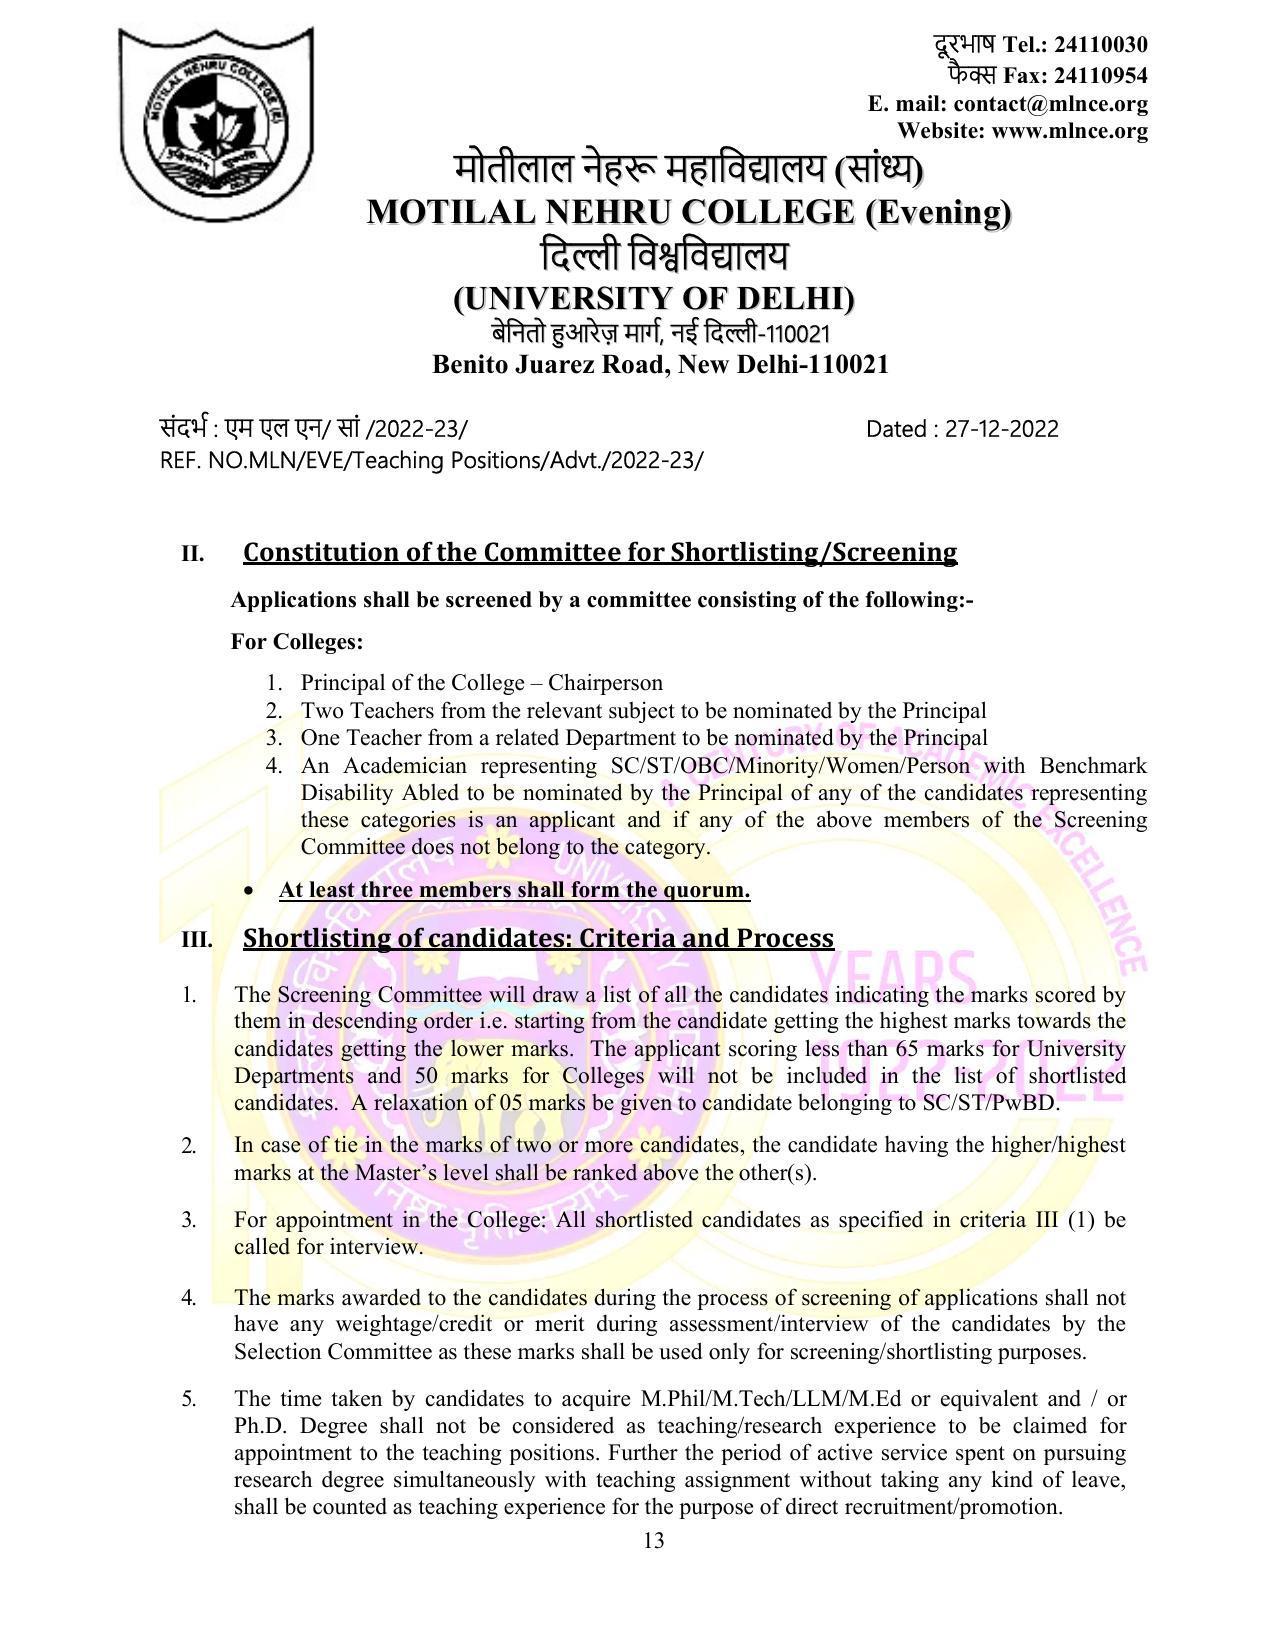 Motilal Nehru College (Evening) Invites Application for 75 Assistant Professor Recruitment 2022 - Page 14